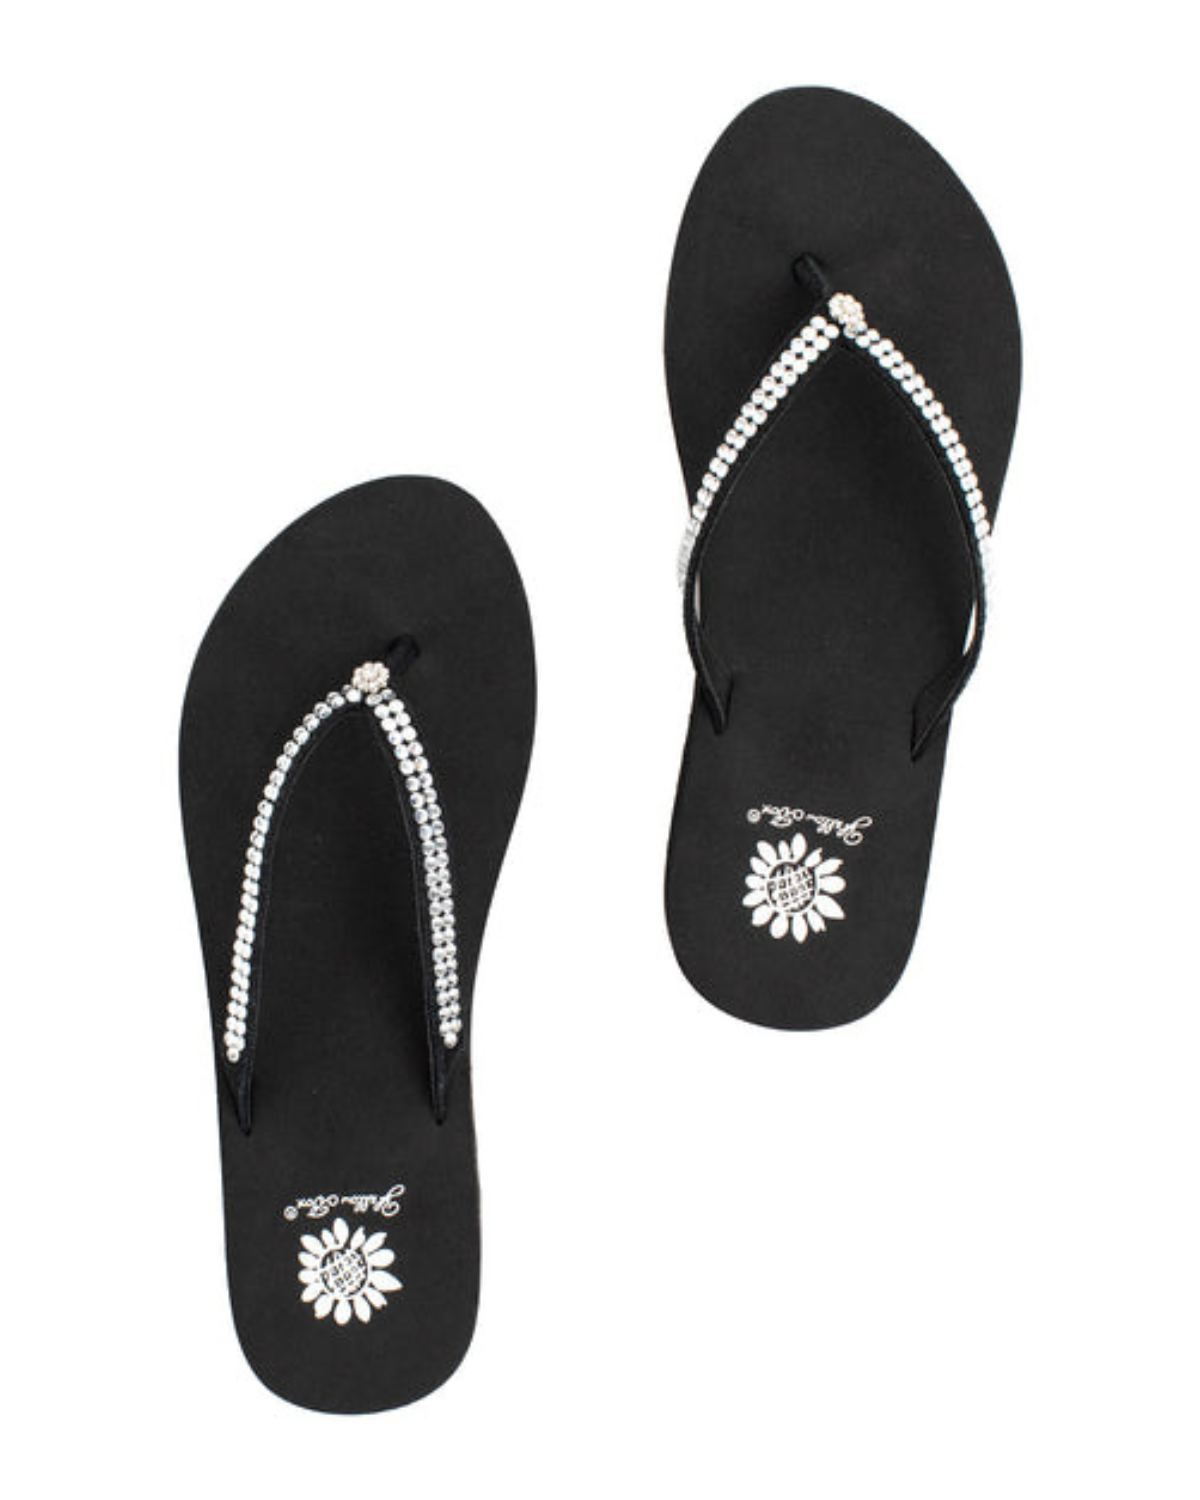 Top view of a pair black wedge sandals with rhinestones on the strap on a white backdrop. The sandal has 1.75" heel height and 0.75" platform height.